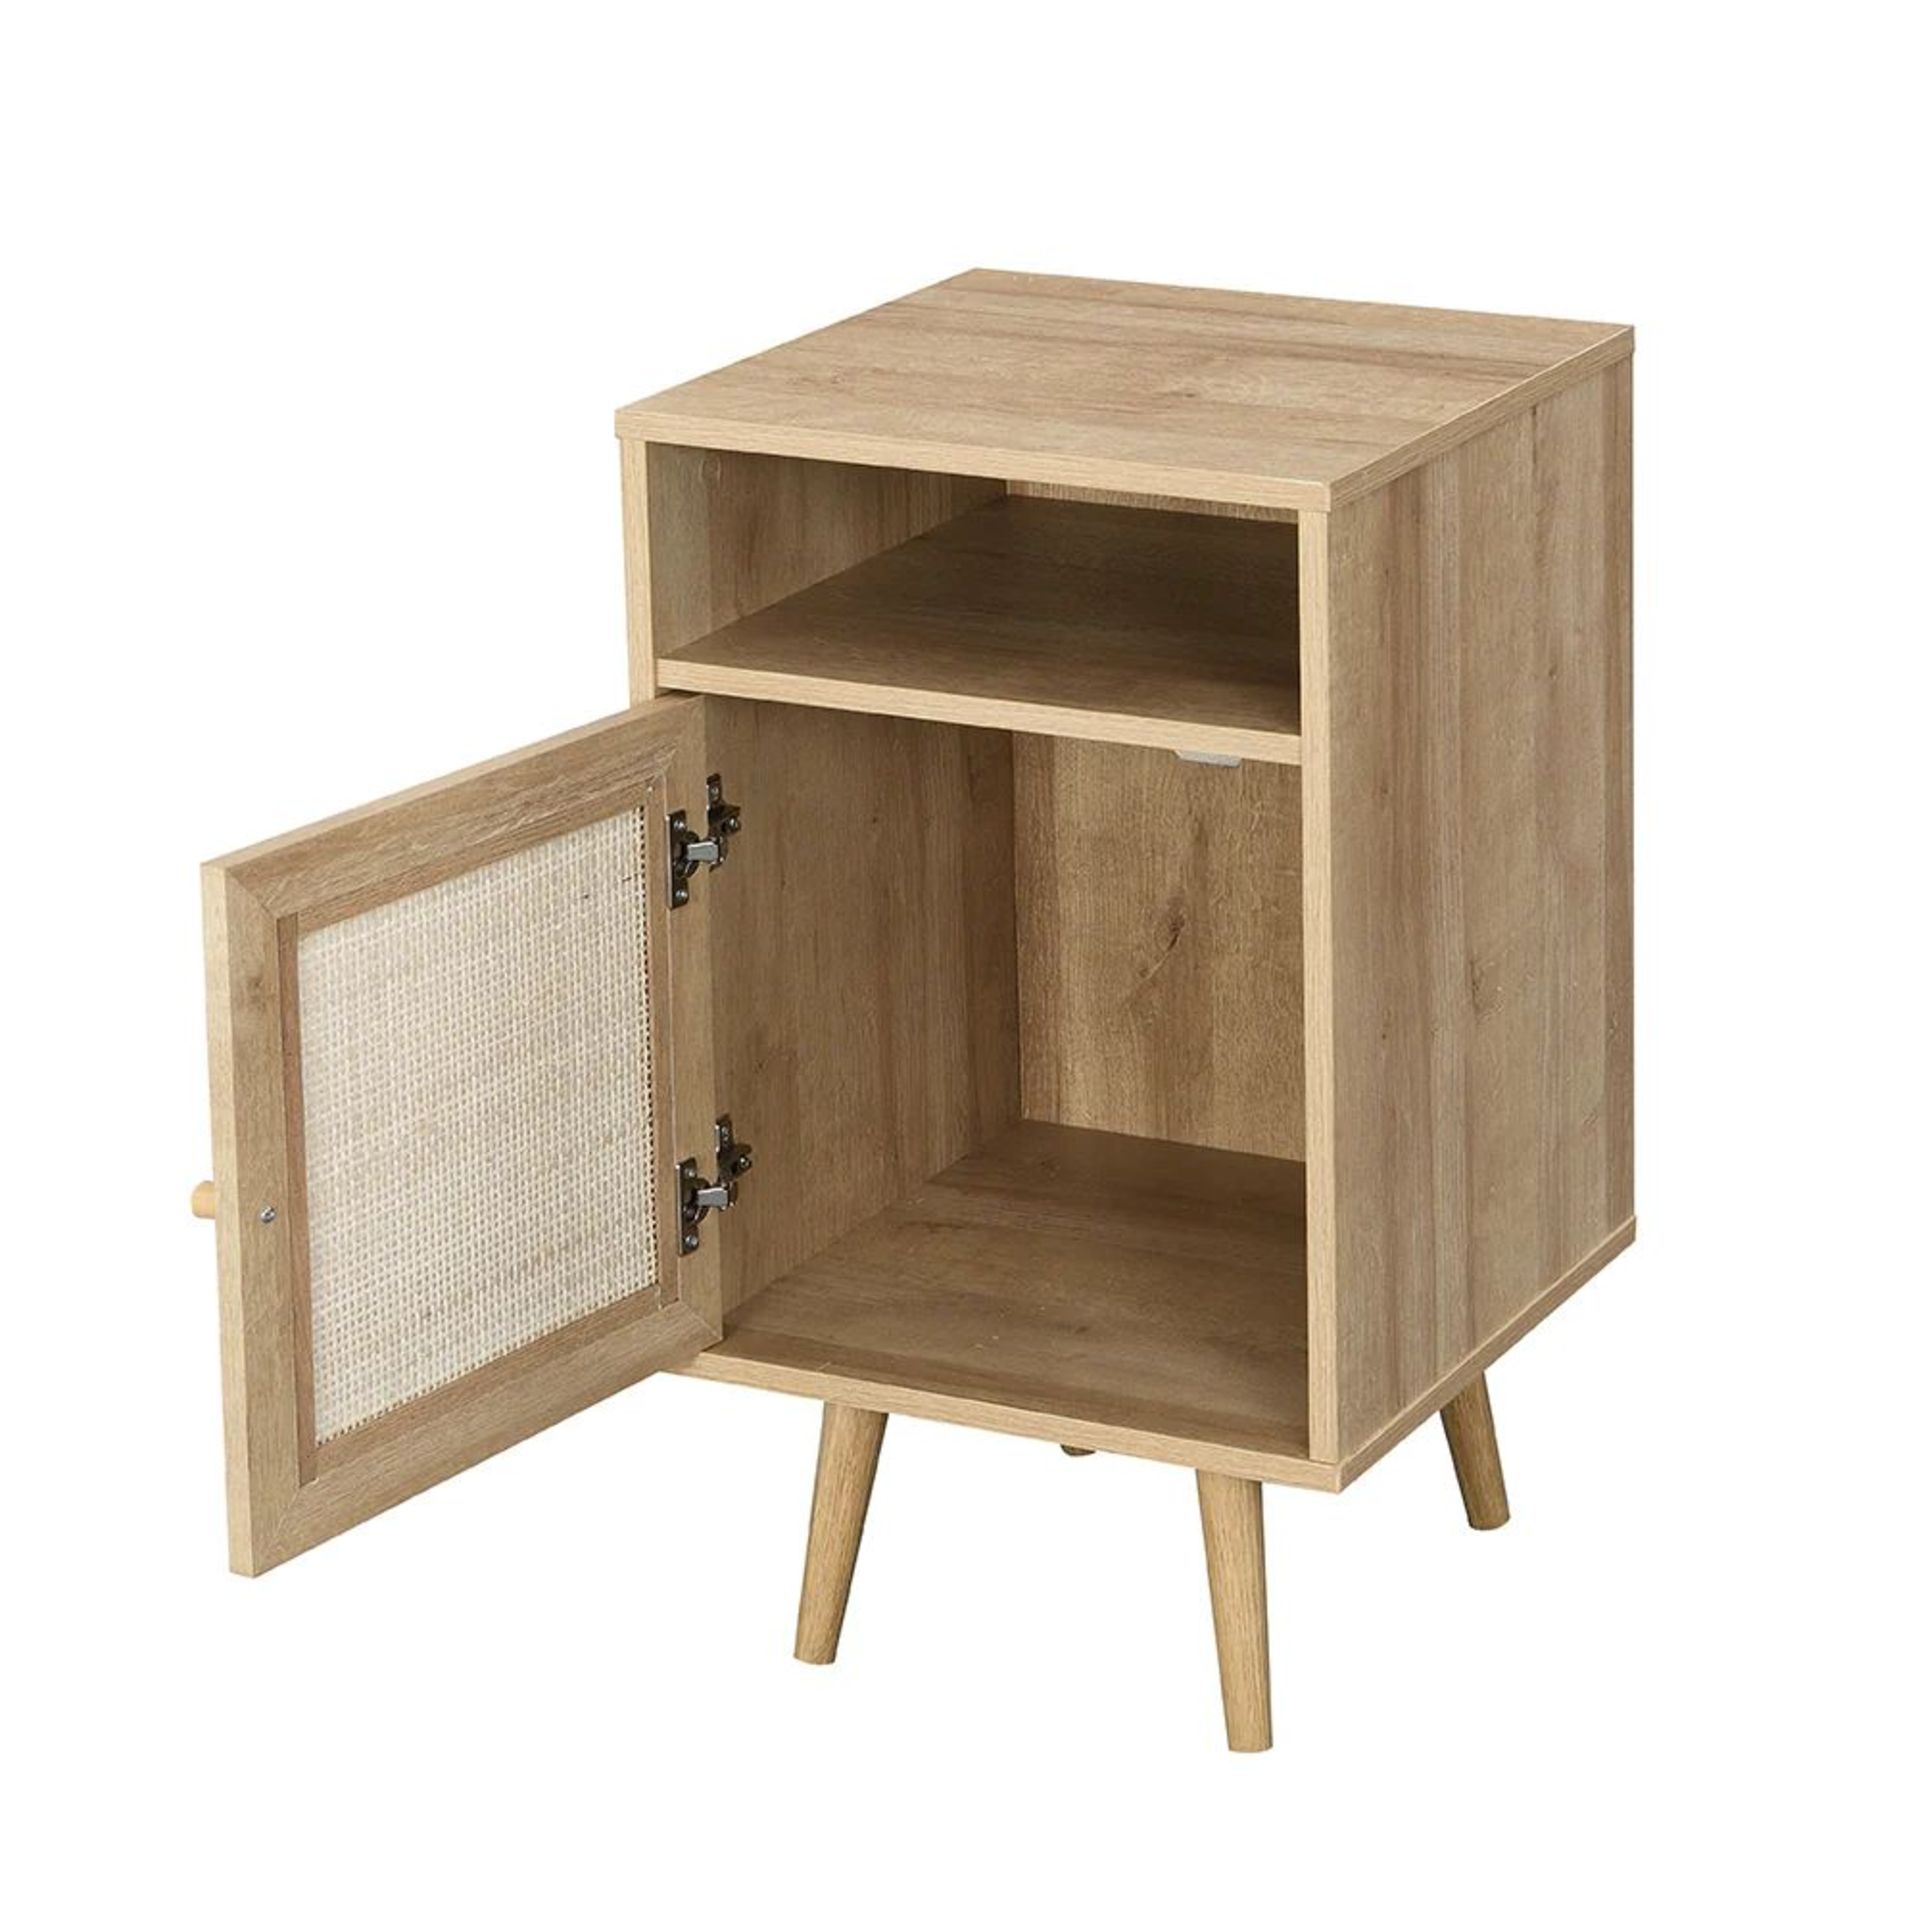 Frances Woven Rattan 1-Door Bedside Table in Natural Colour. - ER29. RRP £149.99. Our Frances - Image 2 of 4